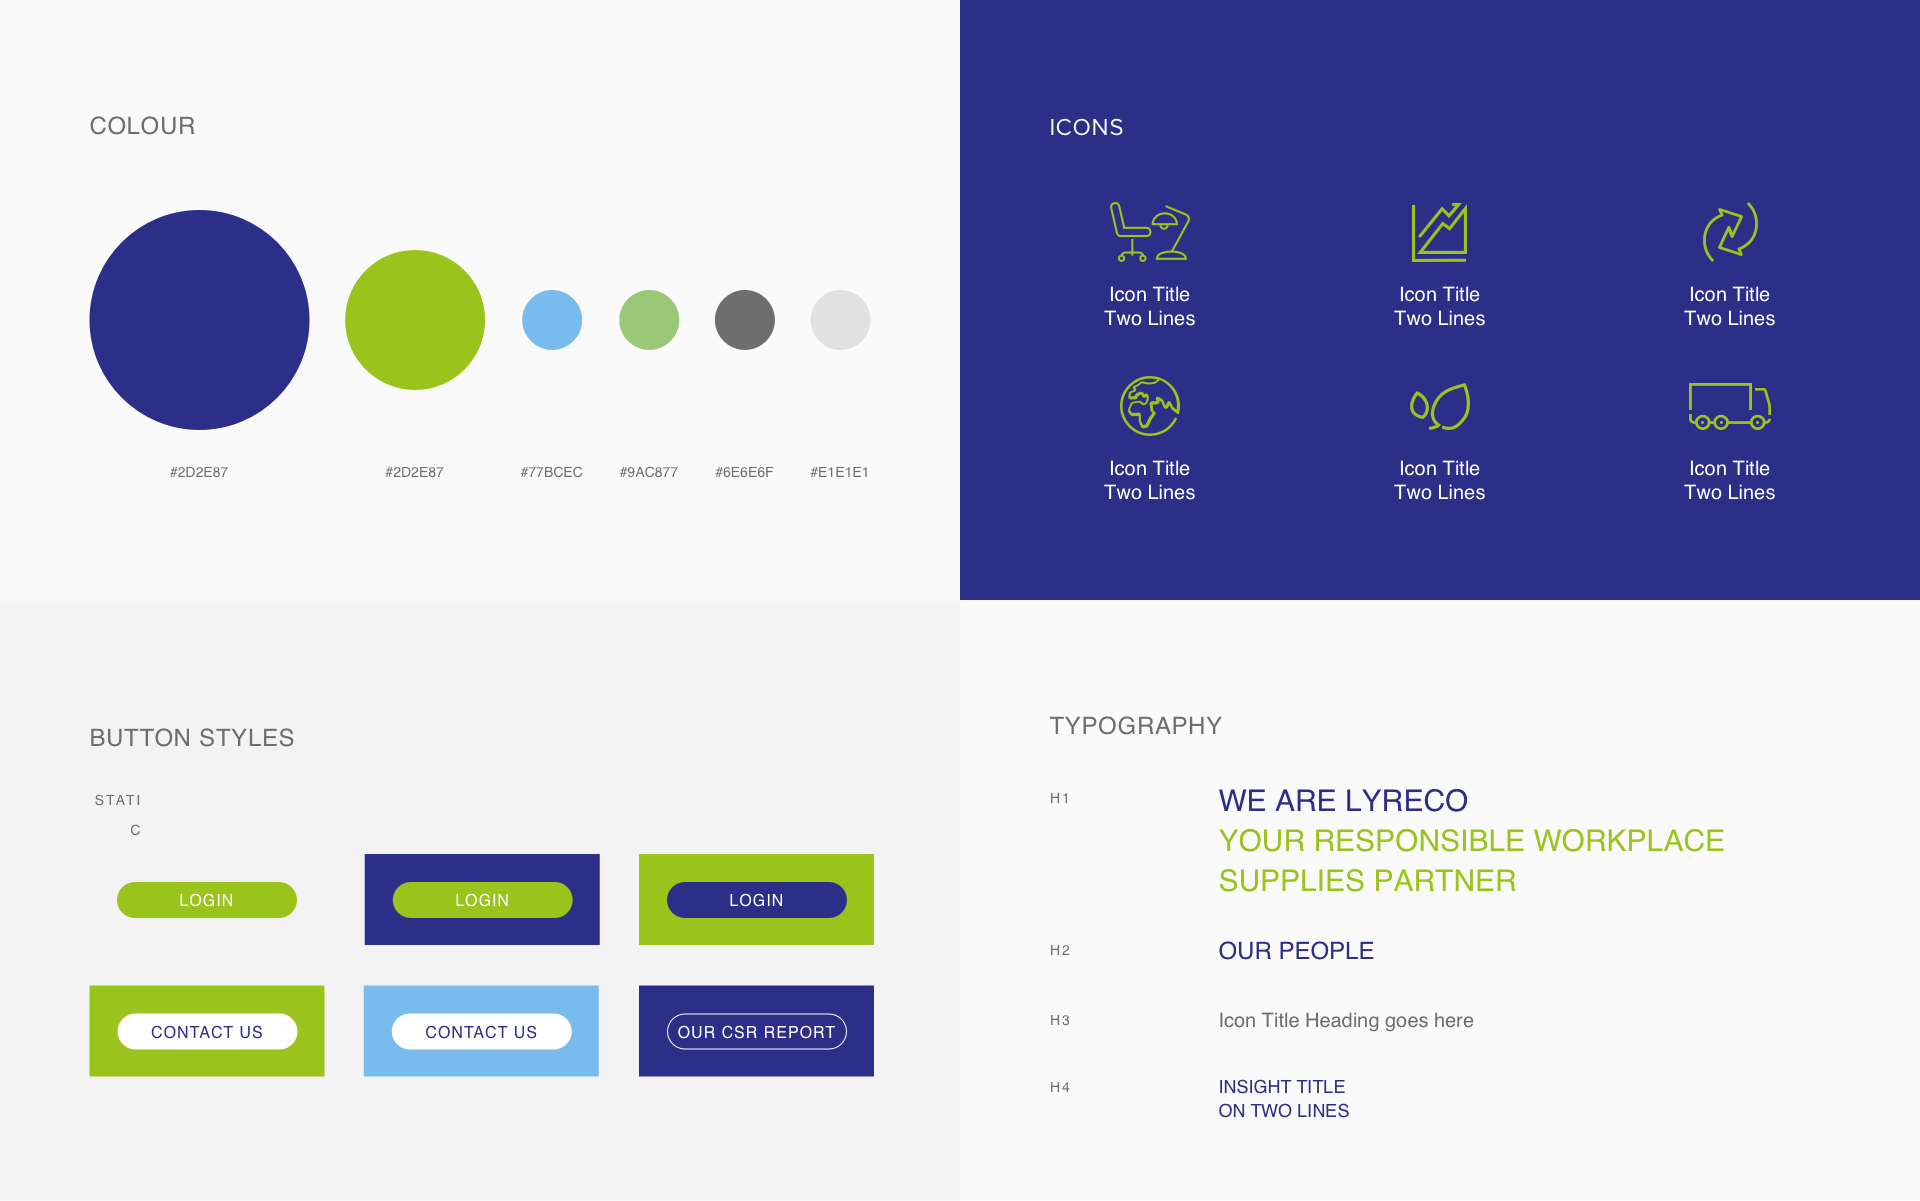 Brand guidelines for Lyreco Goodness showing brand colours, icons, buttons and fonts